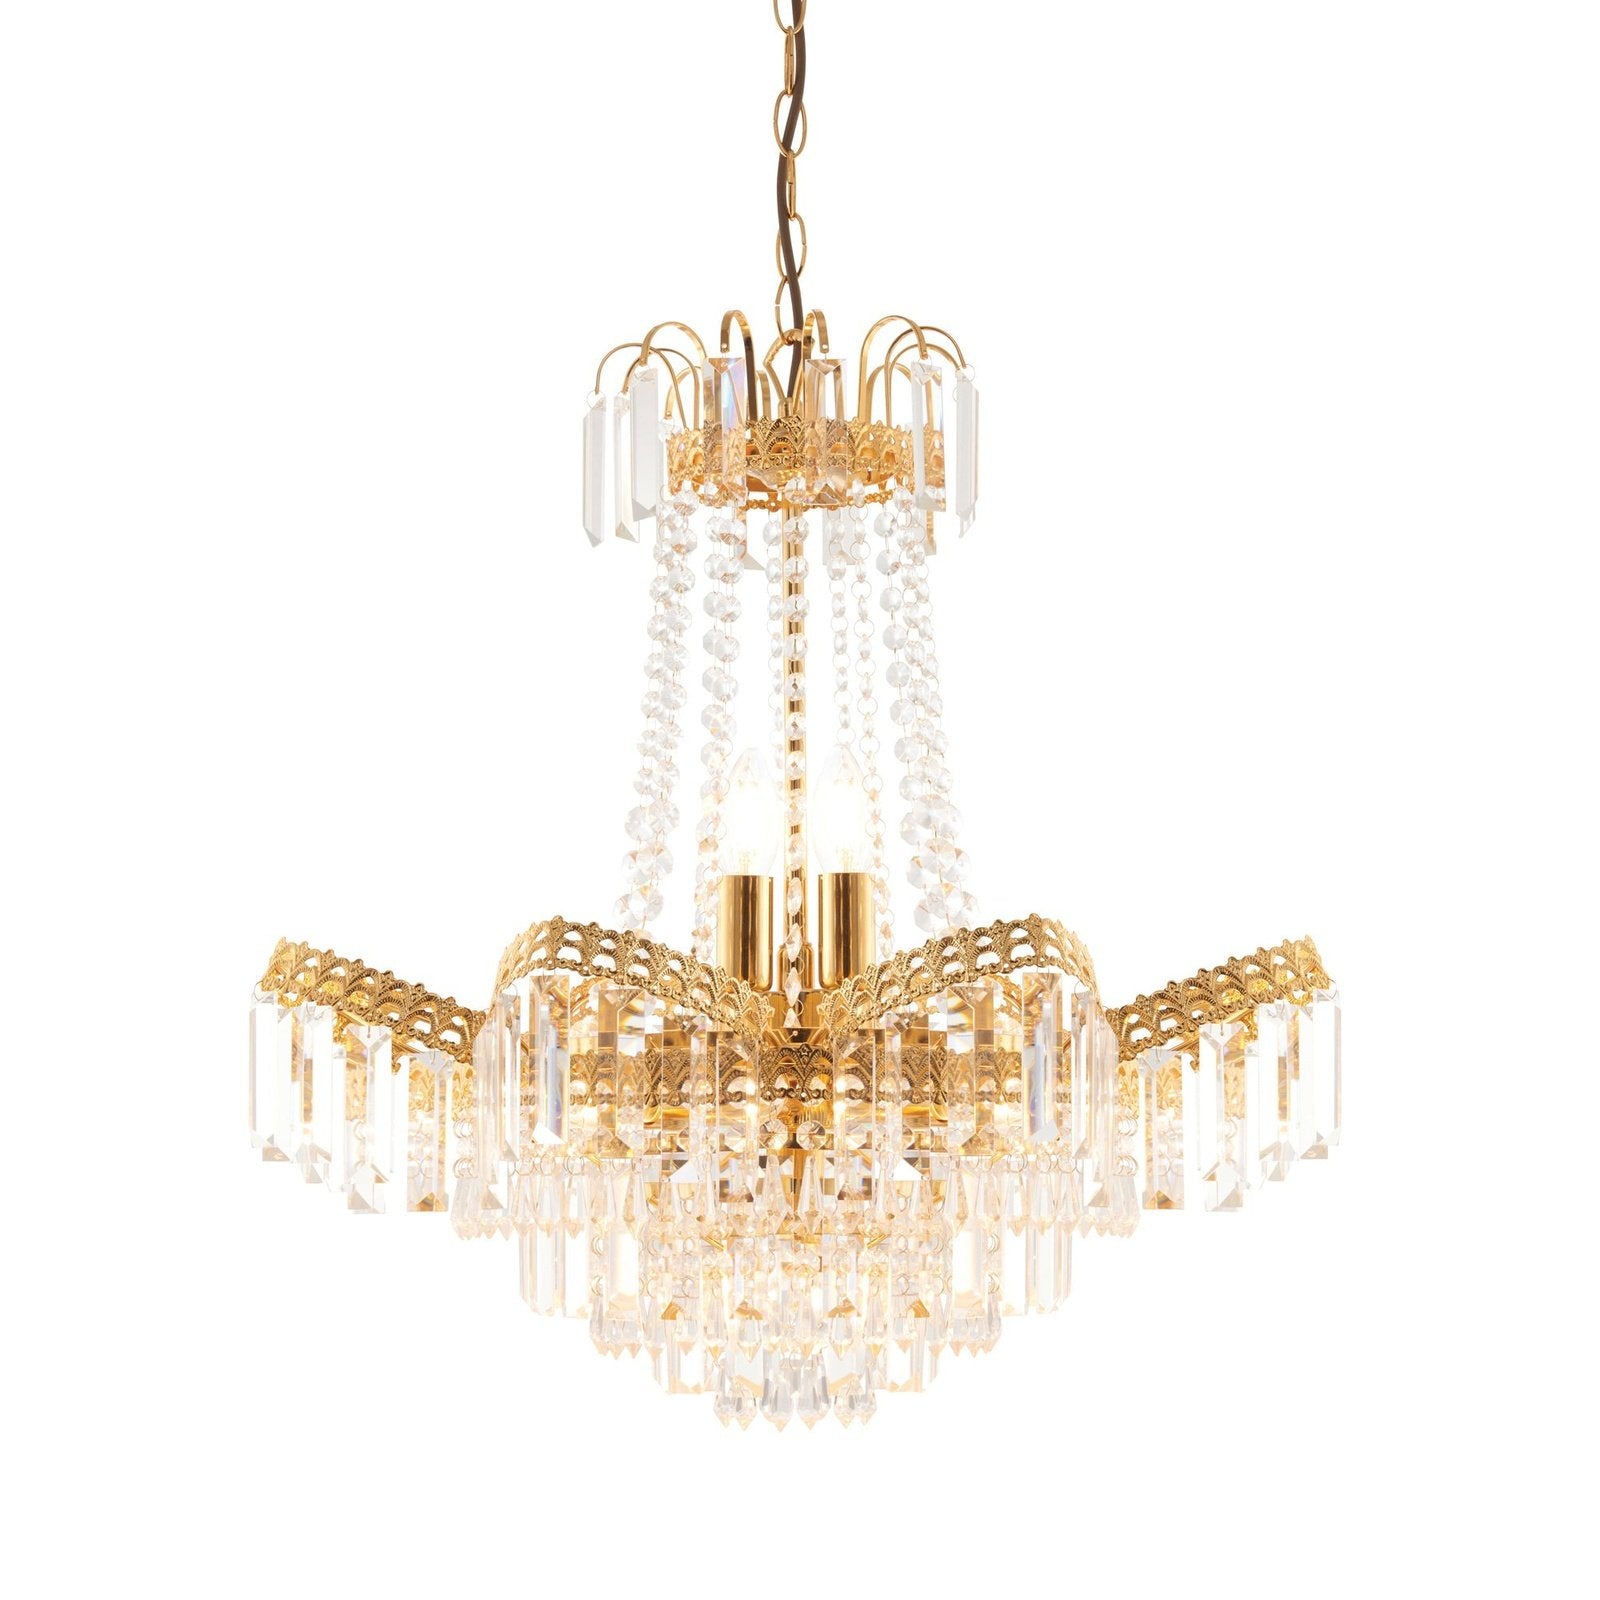 Gatsby 9 Pendant Light Chandelier - Gold Plate Finish - Clear Glass Beads and Droplets - 1350mm Adjustable Drop